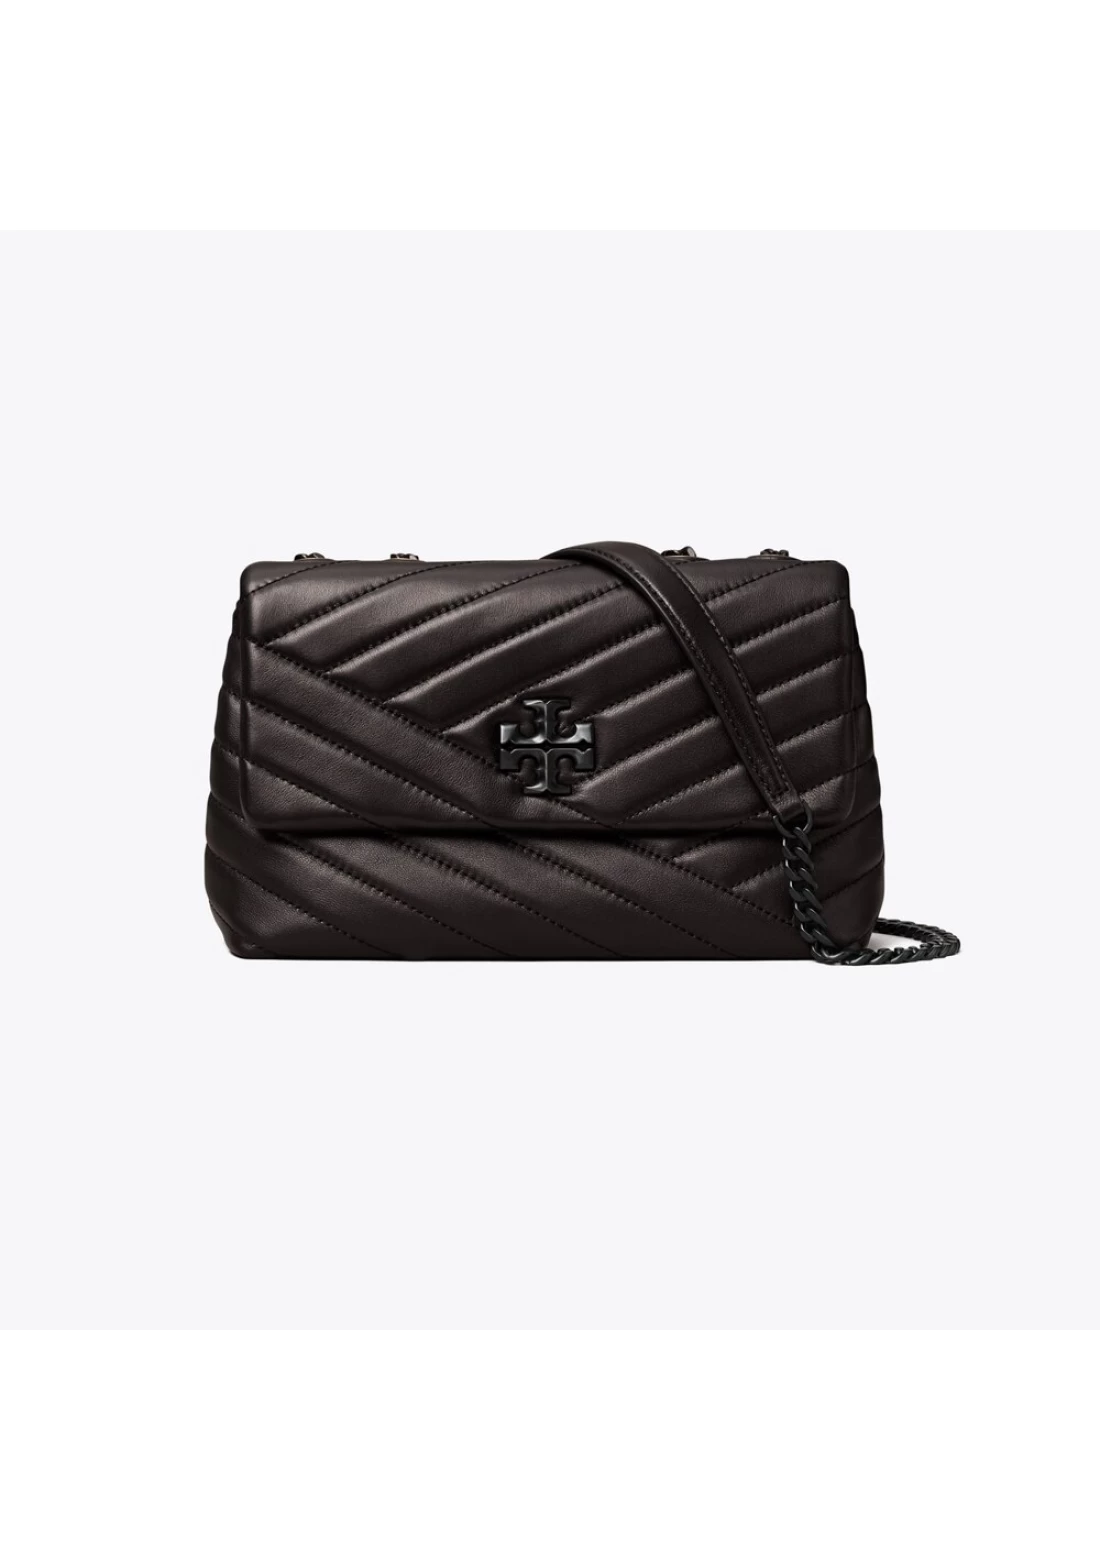 Elevate your workdays with the most-loved Kira Chevron Convertible